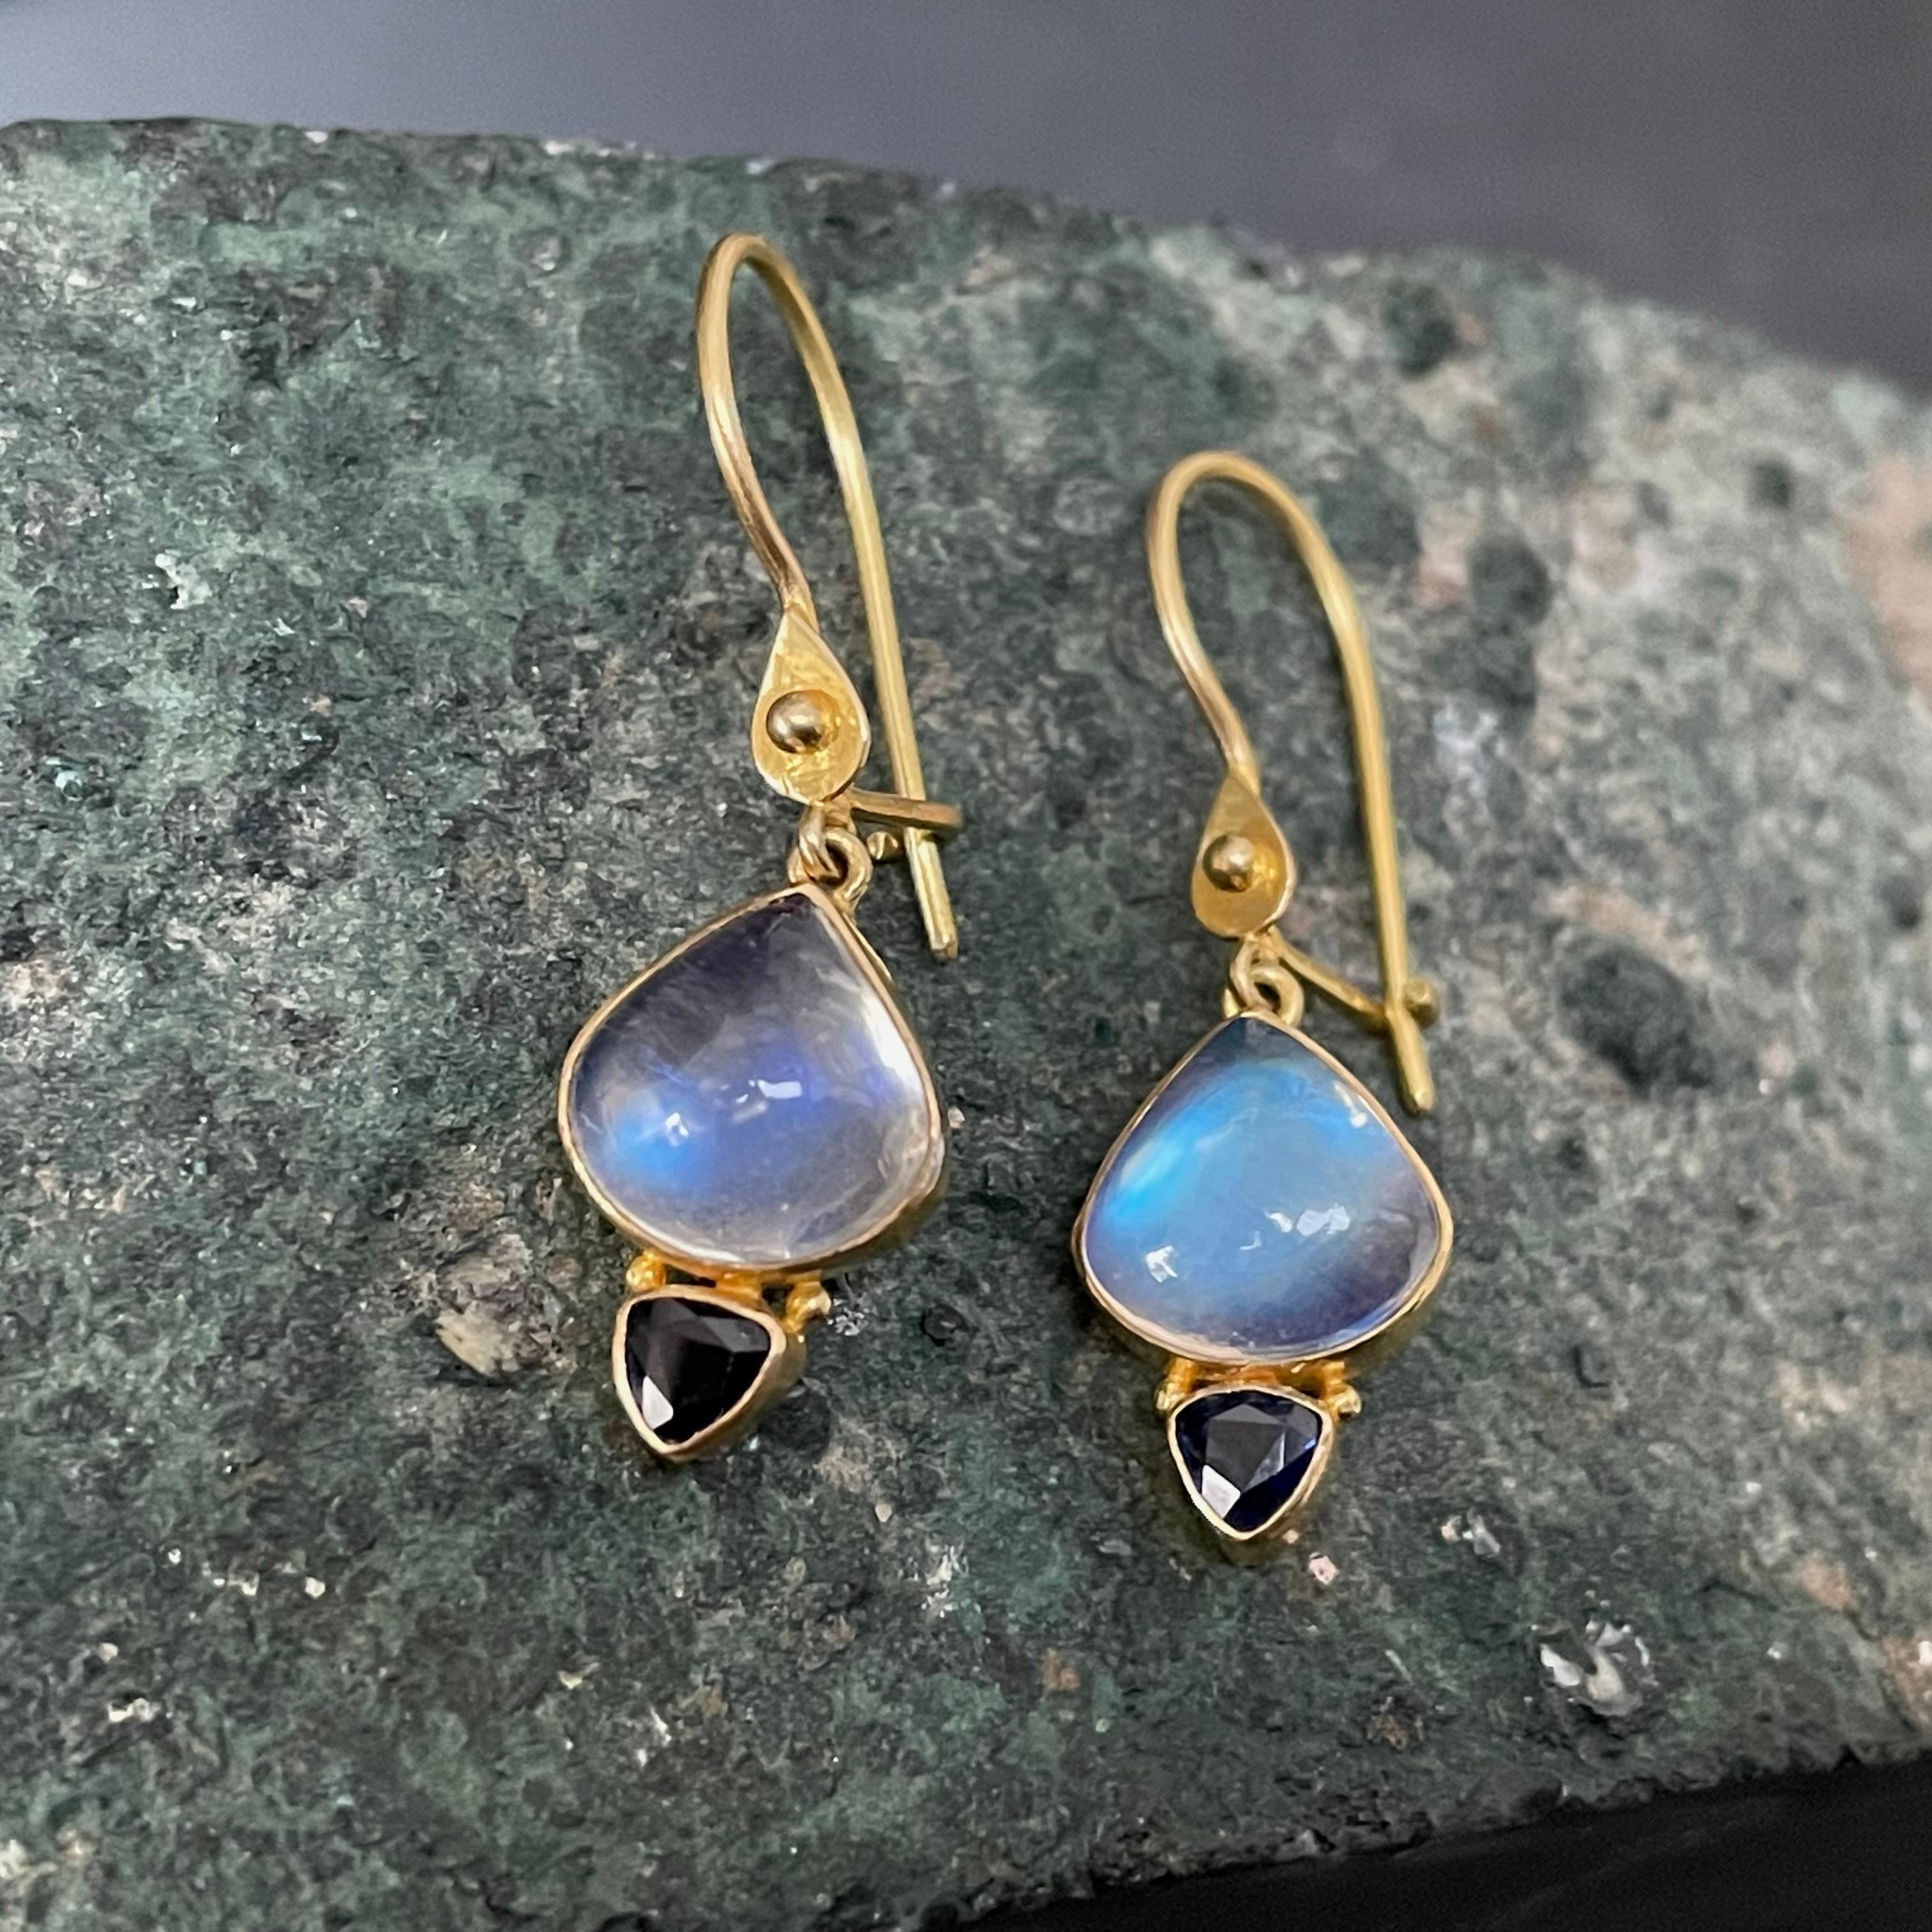 Two 3 mm trillium faceted blue sapphires are set in simple 18K bezels and attached below wide pear shaped 9 mm shimmering rainbow moonstones, all suspended below safety clasp wires with a single 